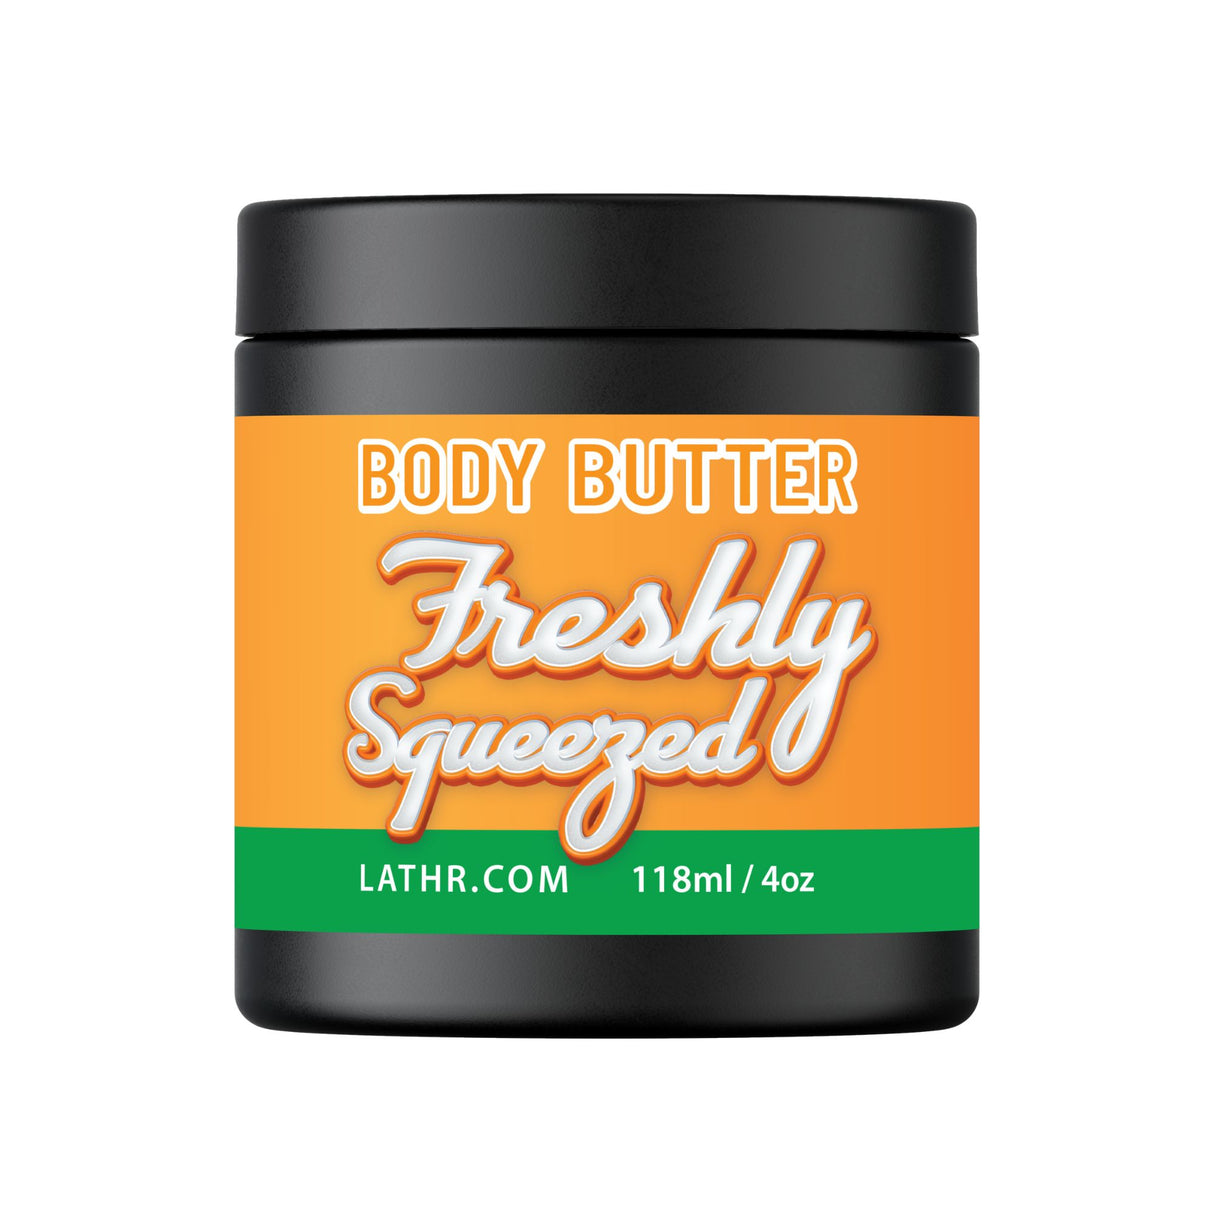 Body Butter - Freshly Squeezed